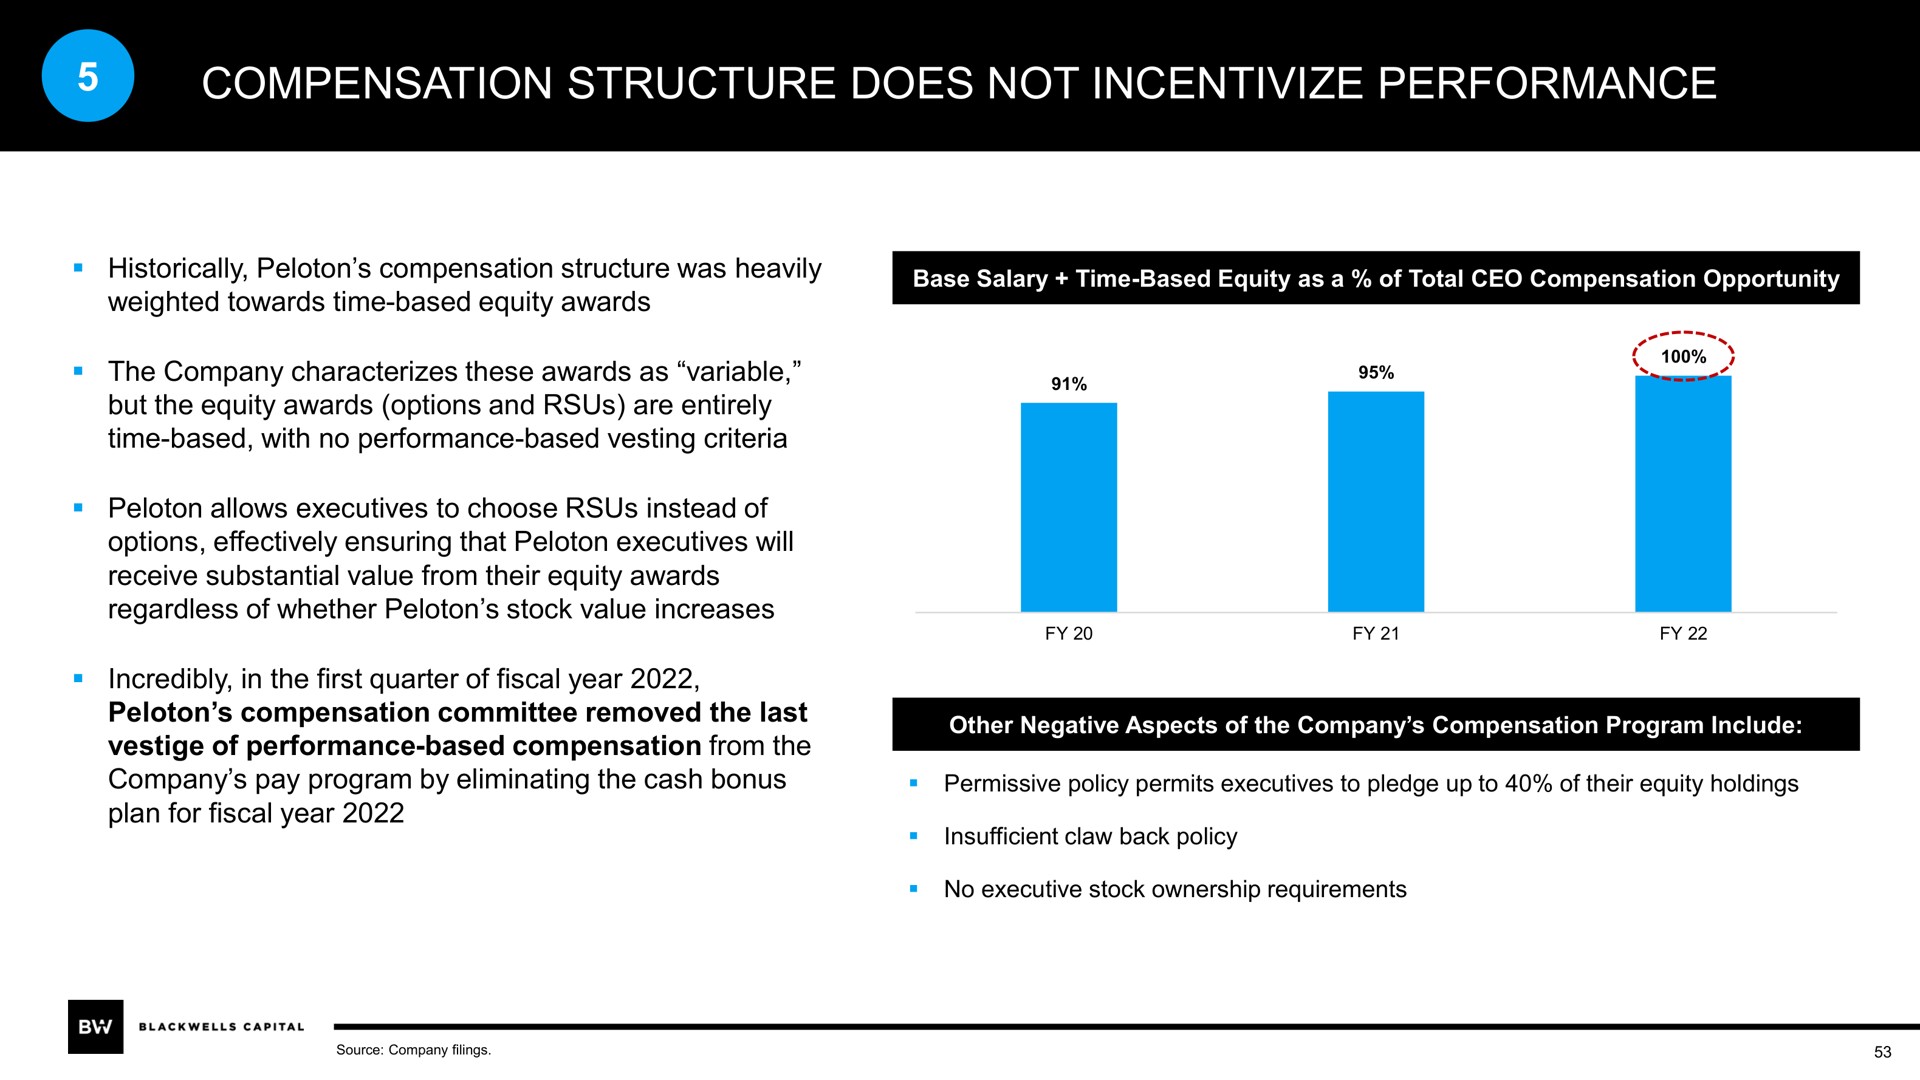 compensation structure does not performance | Blackwells Capital